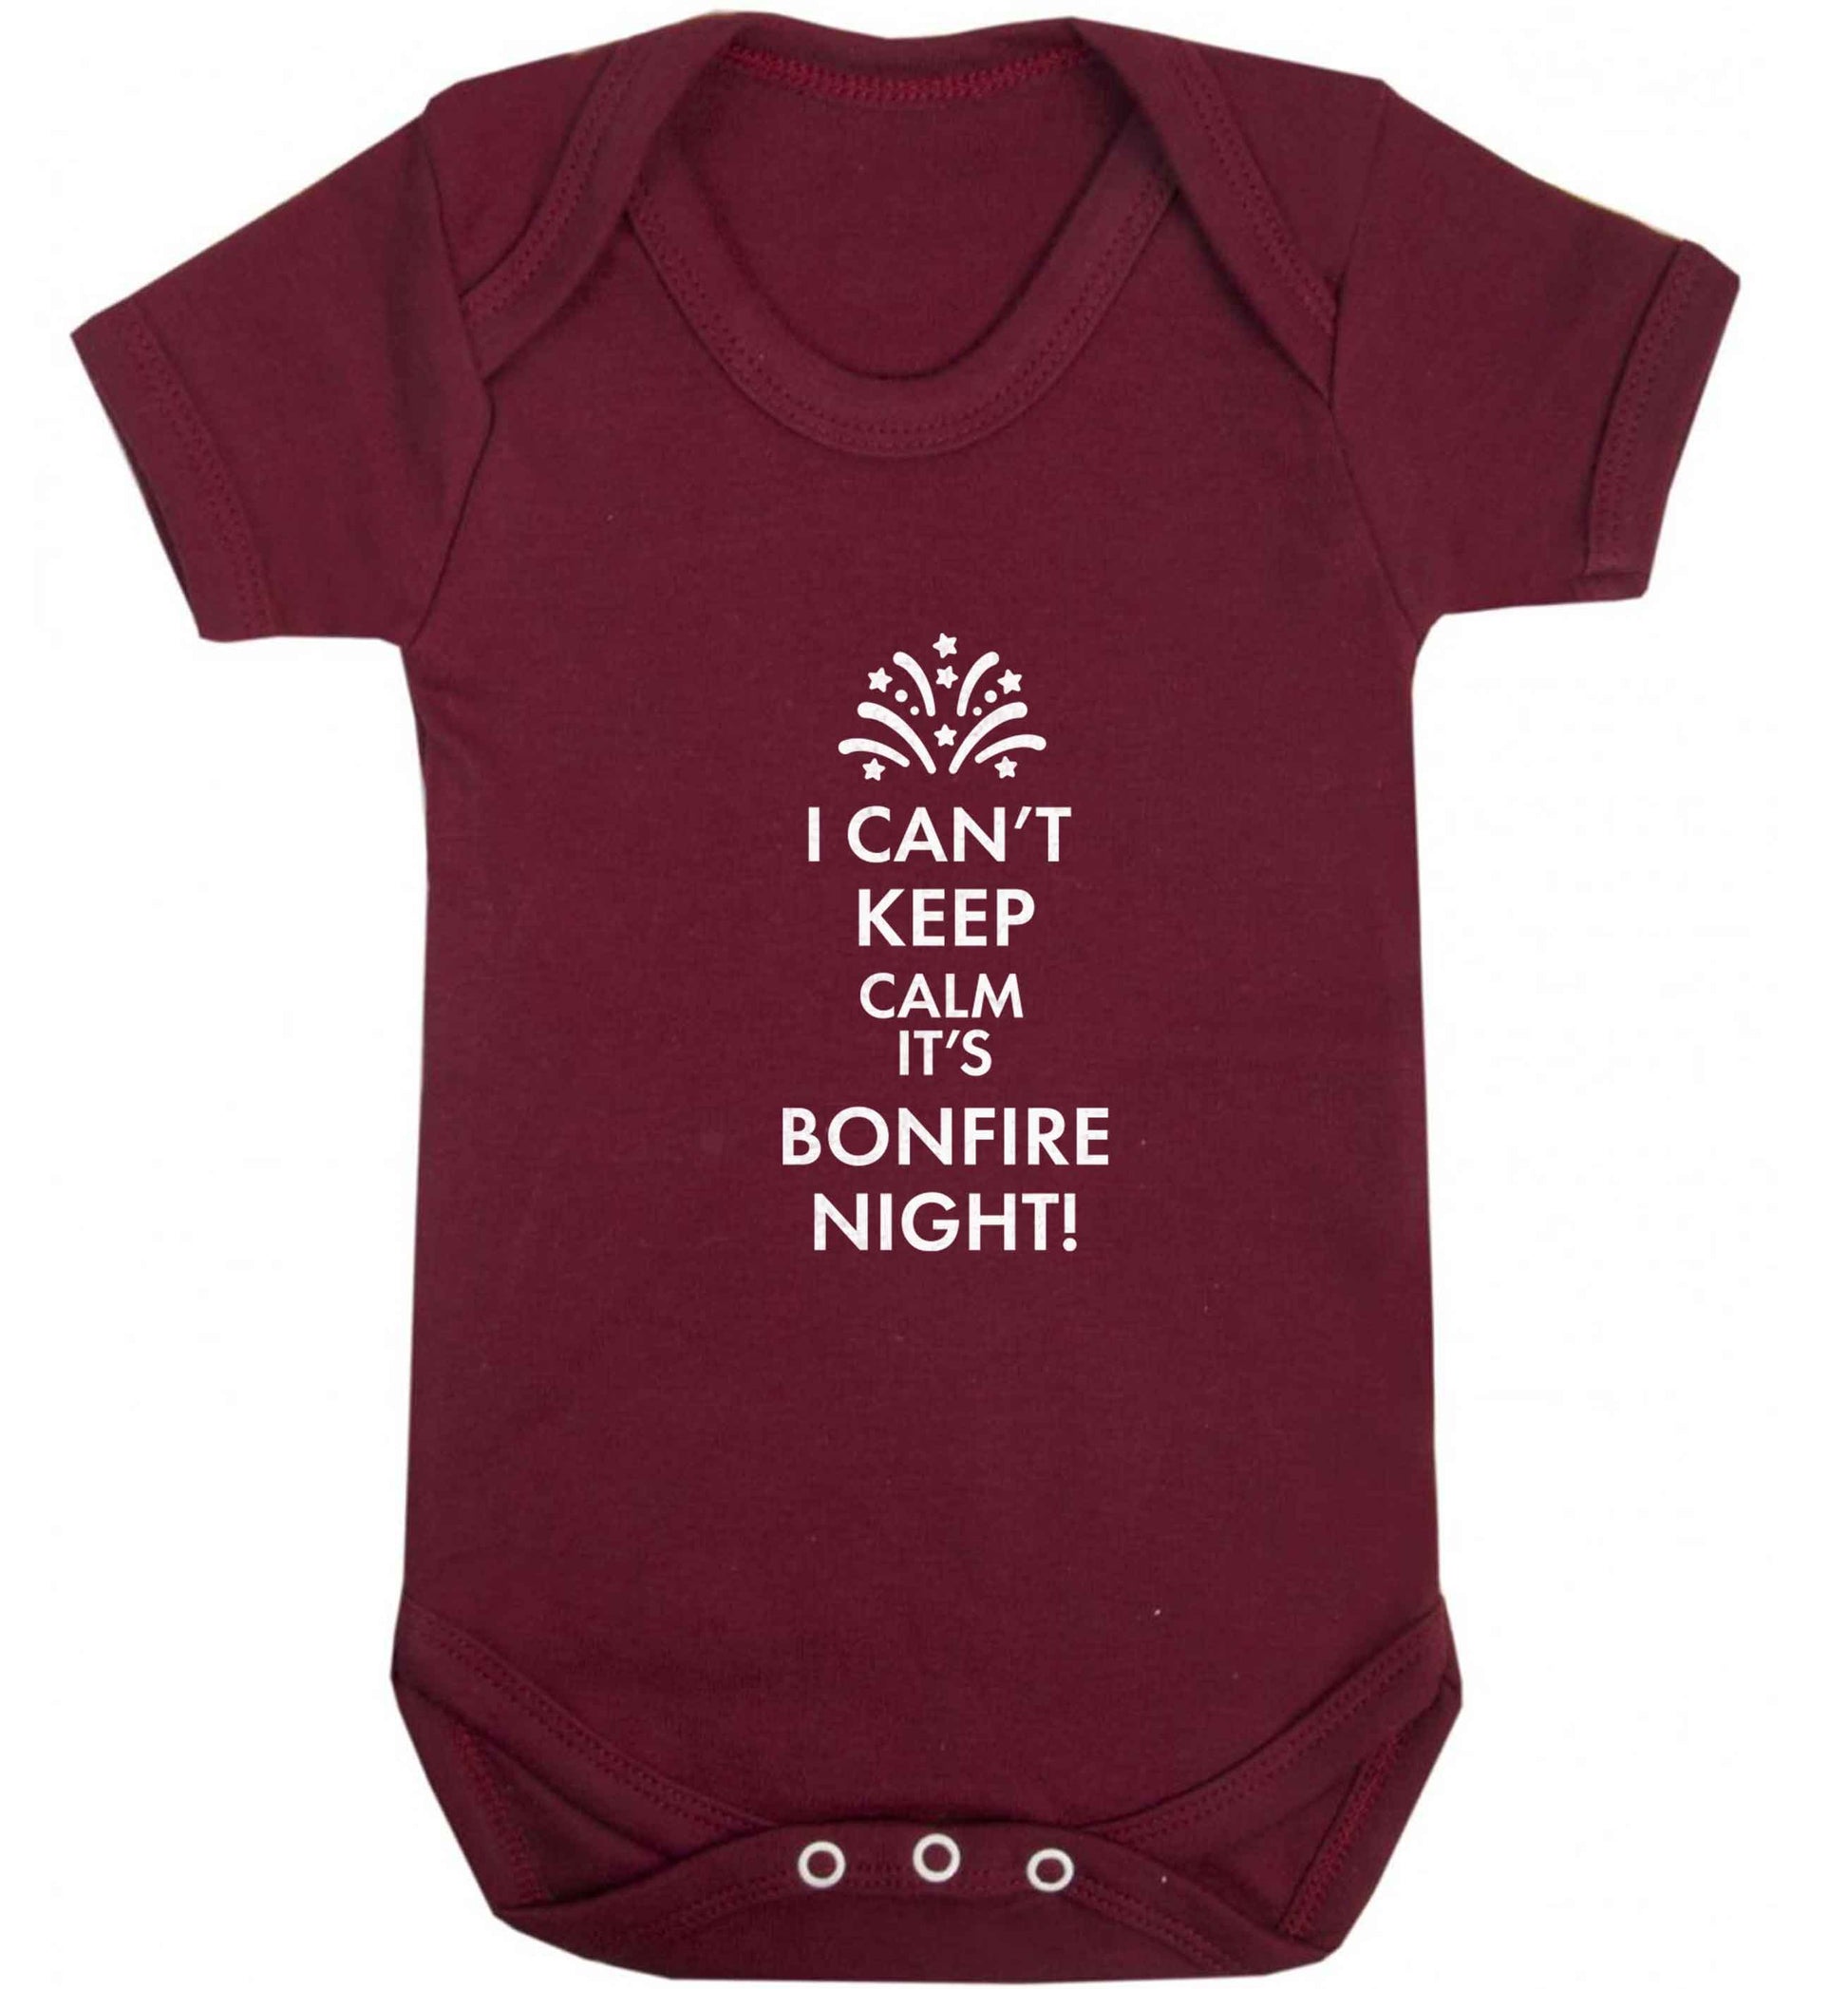 I can't keep calm its bonfire night baby vest maroon 18-24 months